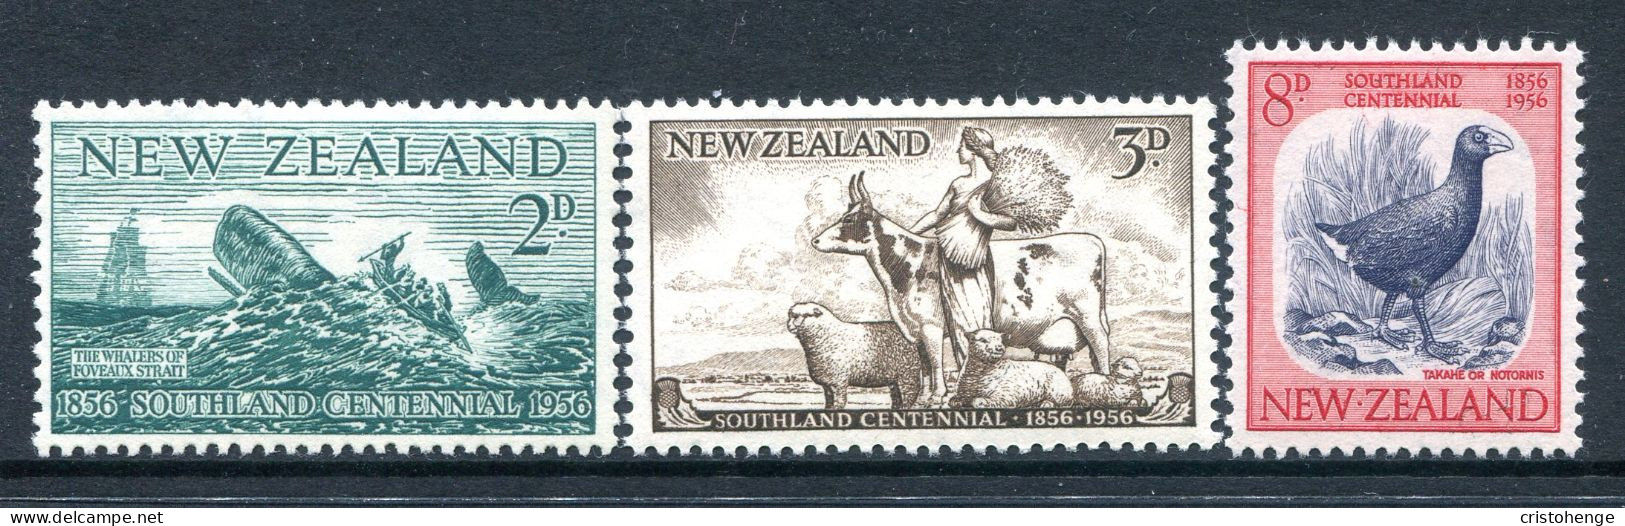 New Zealand 1956 Southland Centennial Set HM (SG 752-754) - Unused Stamps